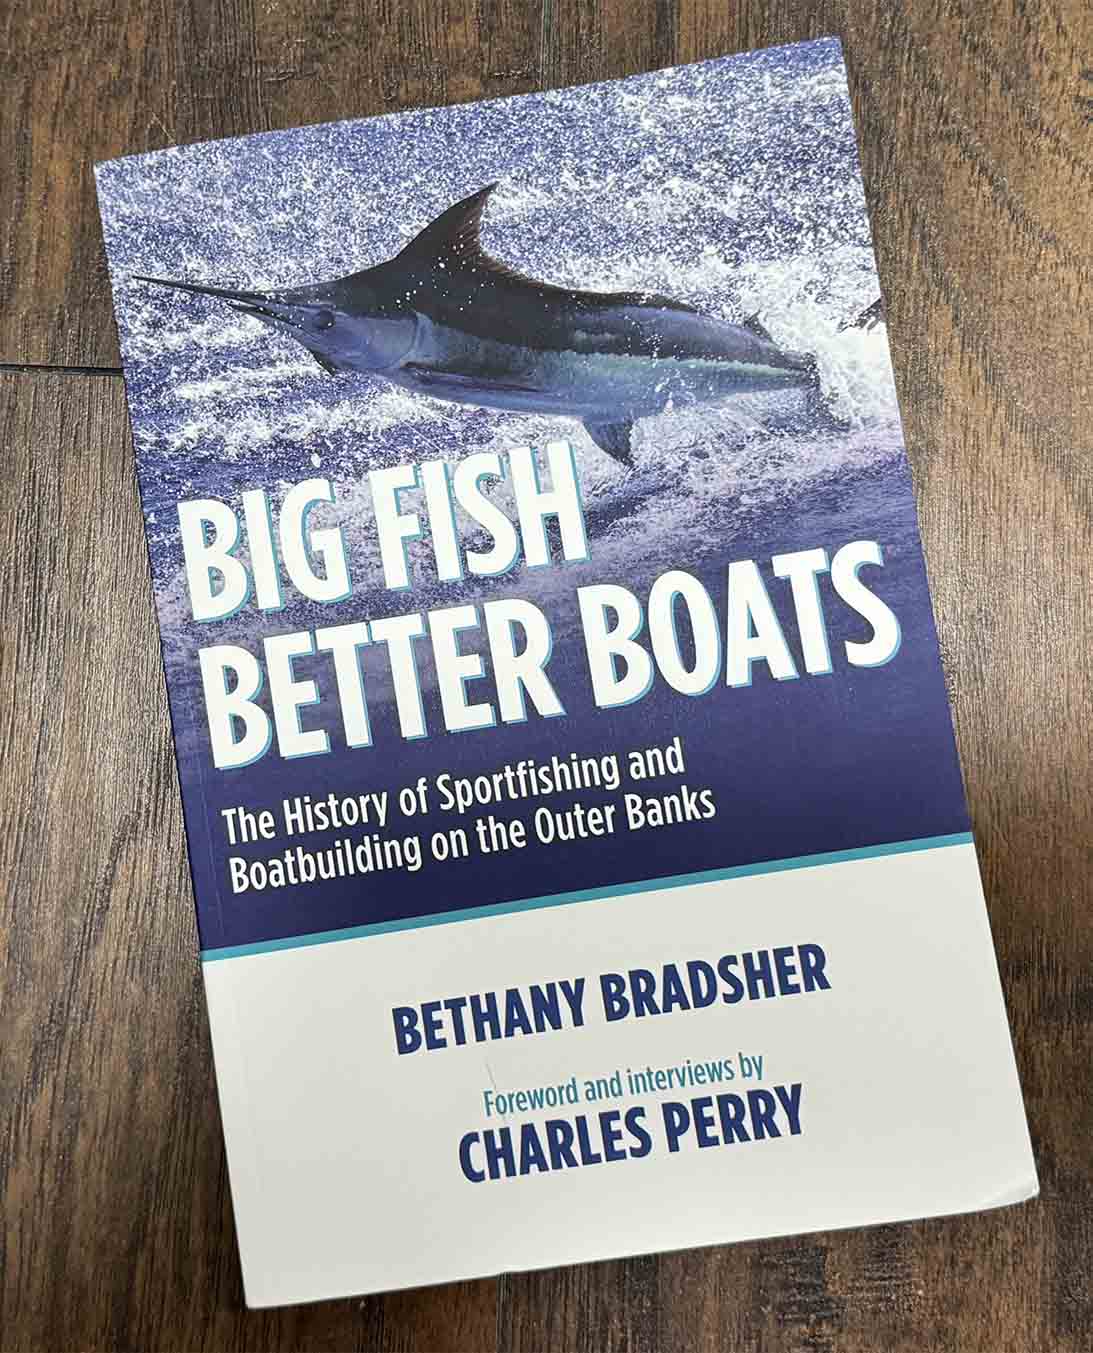 A book by Charles Perry Big Fish Better Boats